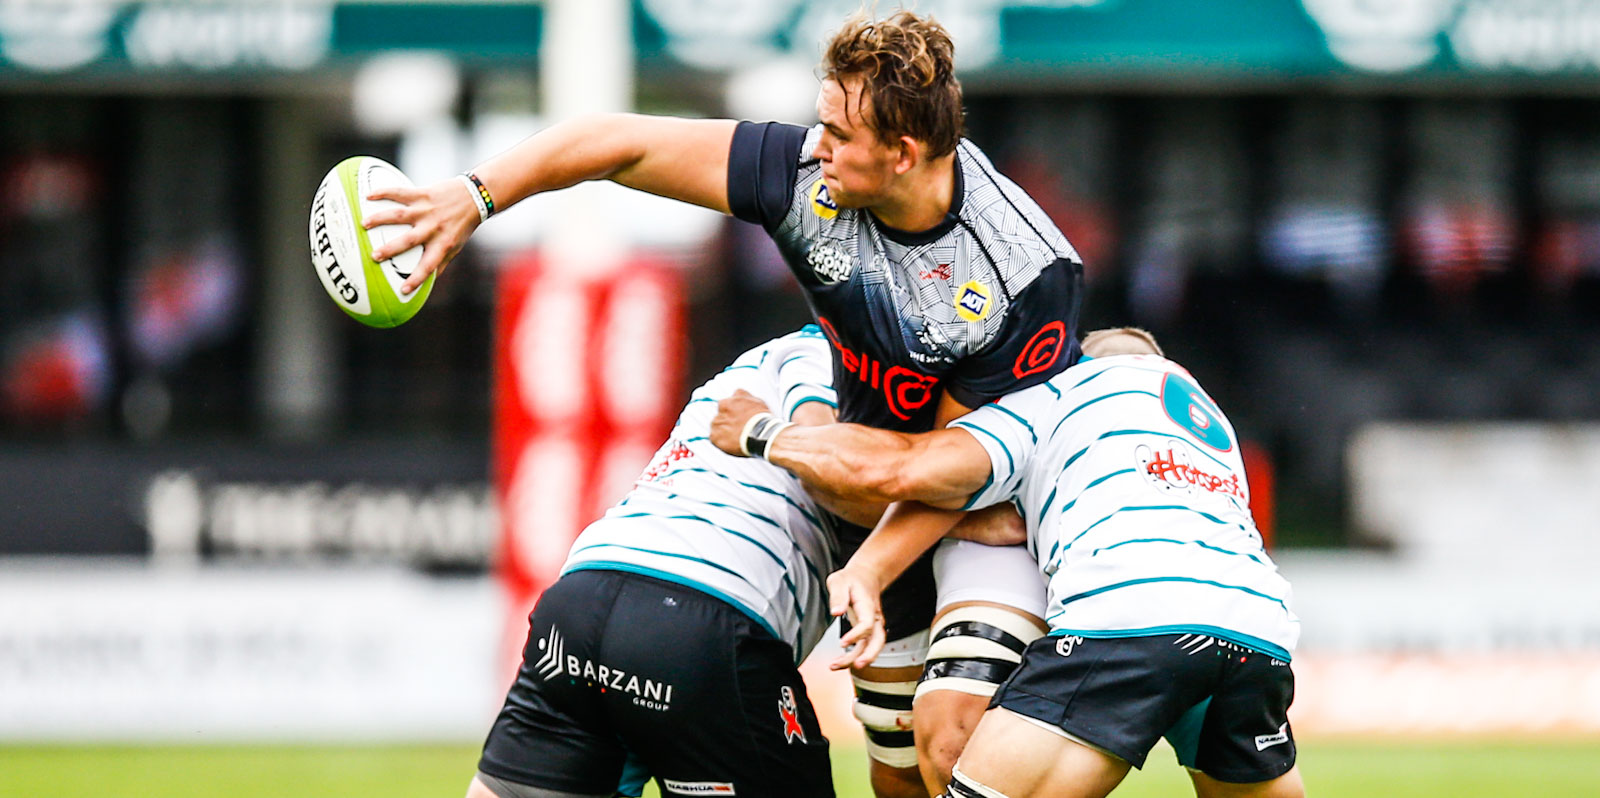 JJ van der Mescht gets the ball away for the Cell C Sharks in their match against Tafel Lager Griquas.